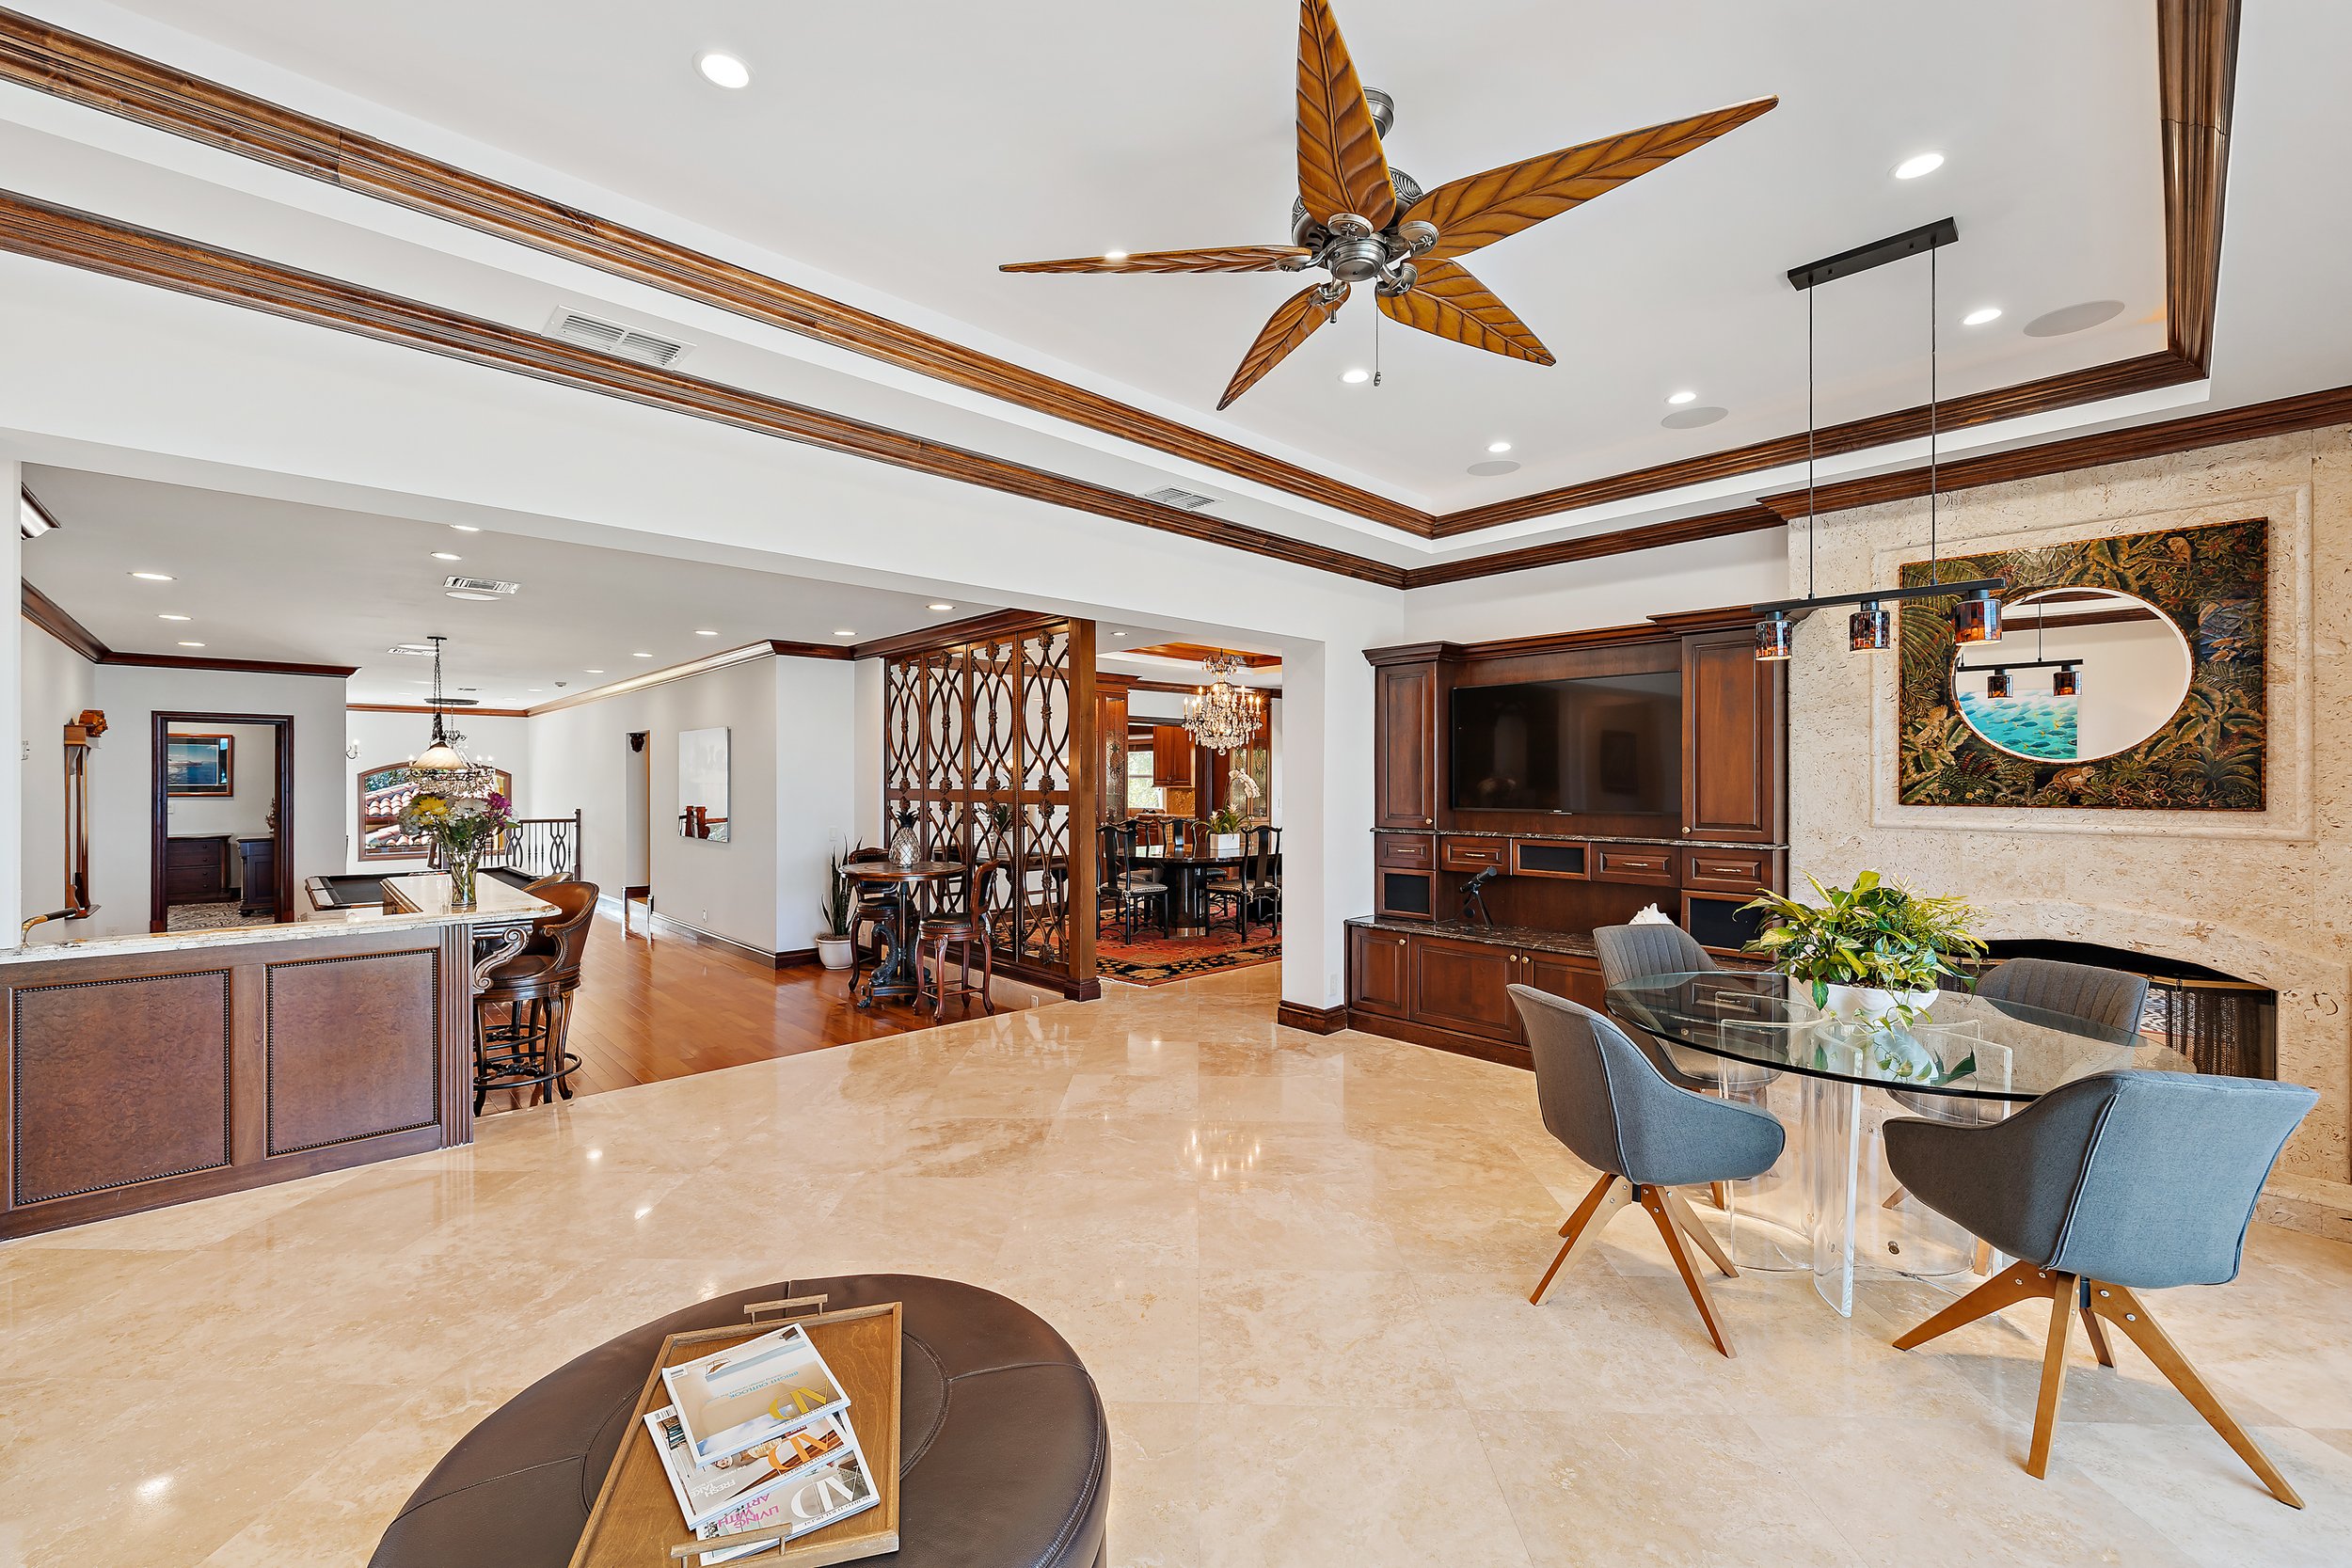 Tour A Jupiter Beachfront Mansion Owned By Clyde R. %22Buzz%22 Gibb Which Is Asking $24.9 Million 119.jpg